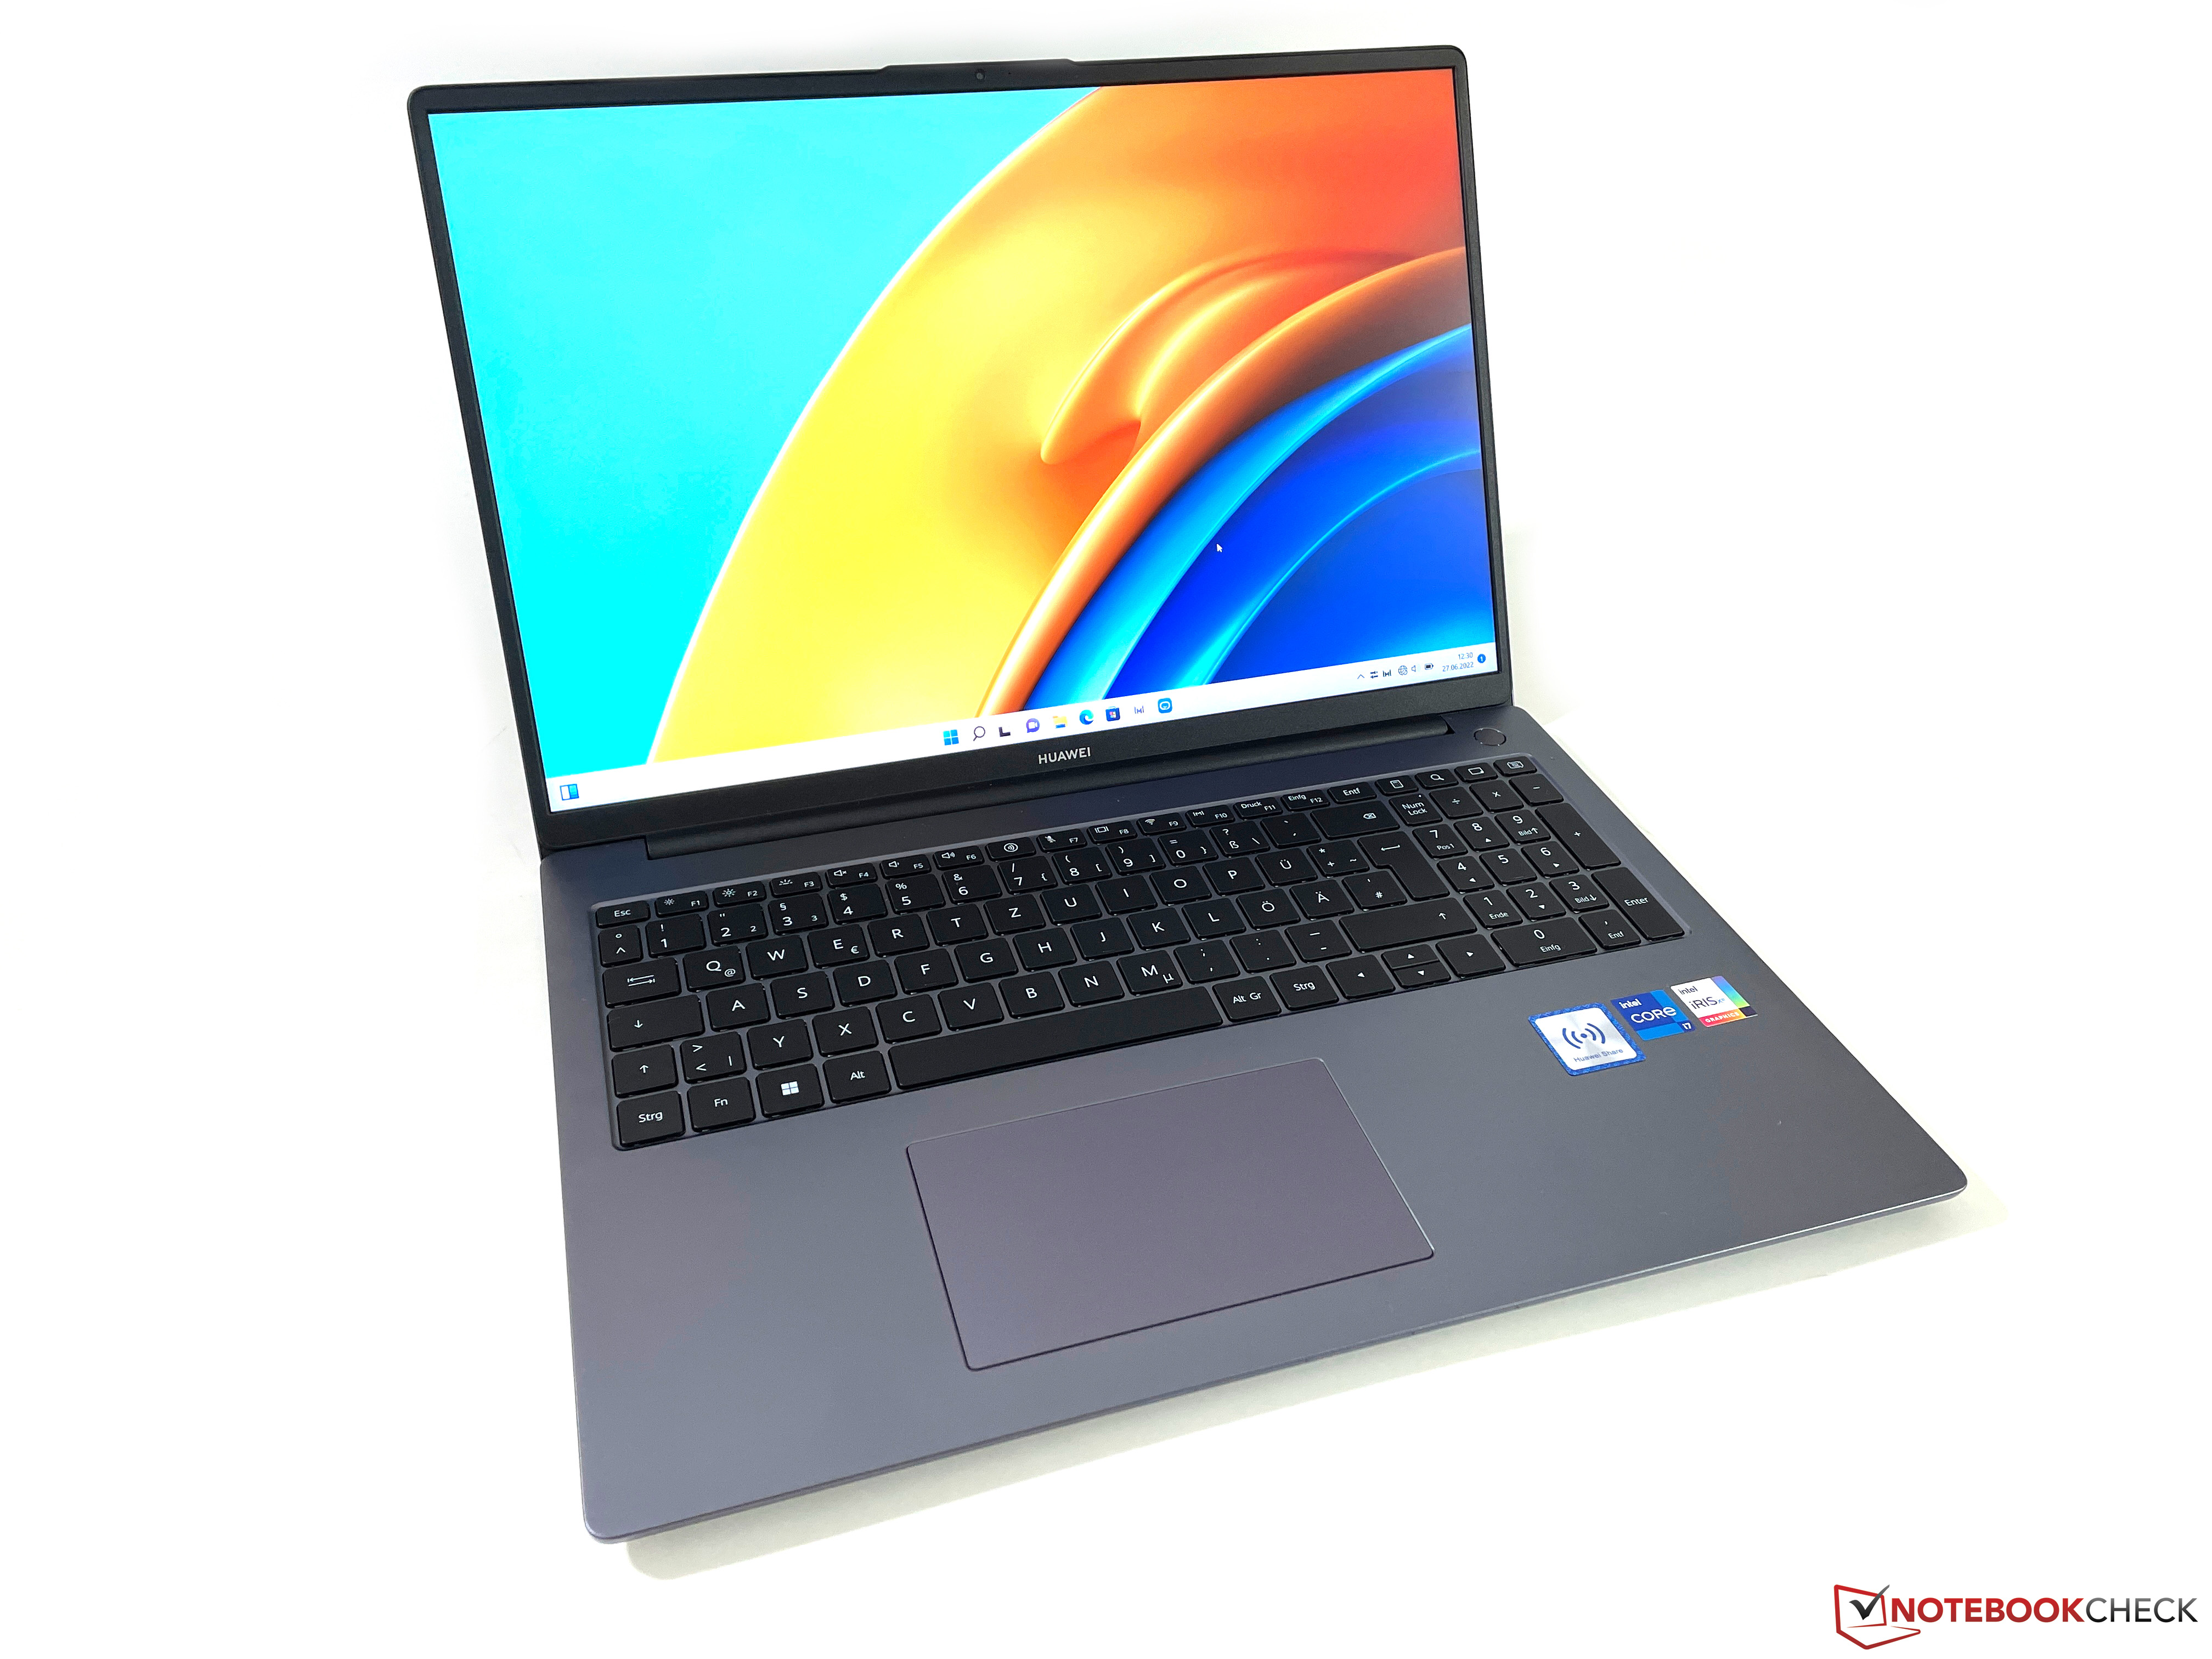 Huawei MateBook D 16 2022 review - Multimedia laptop now in 16:10 format and with number pad